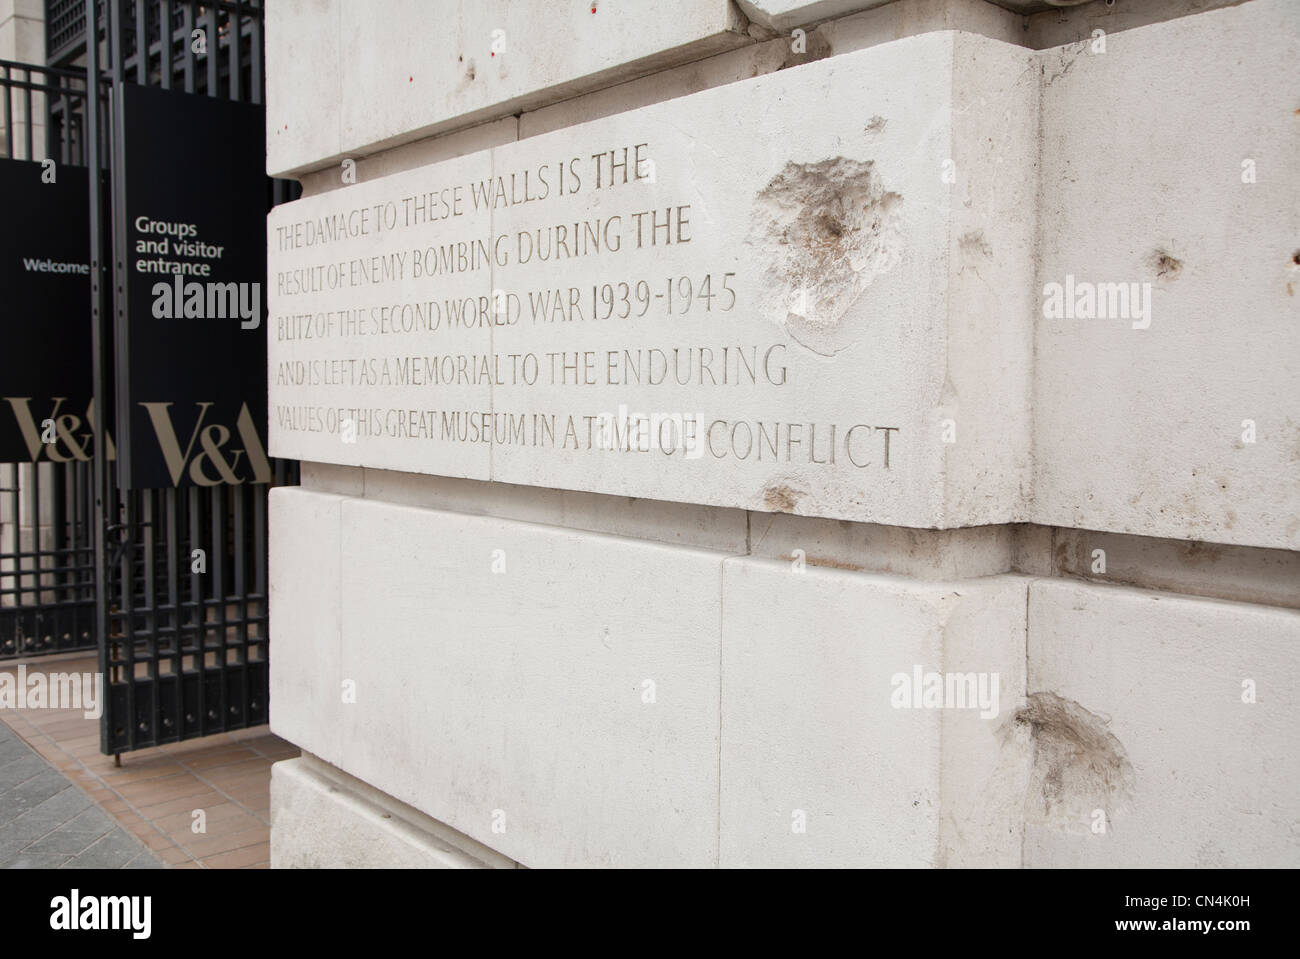 Bomb damaged wall outside the Victoria and Albert museum in London Britain Stock Photo